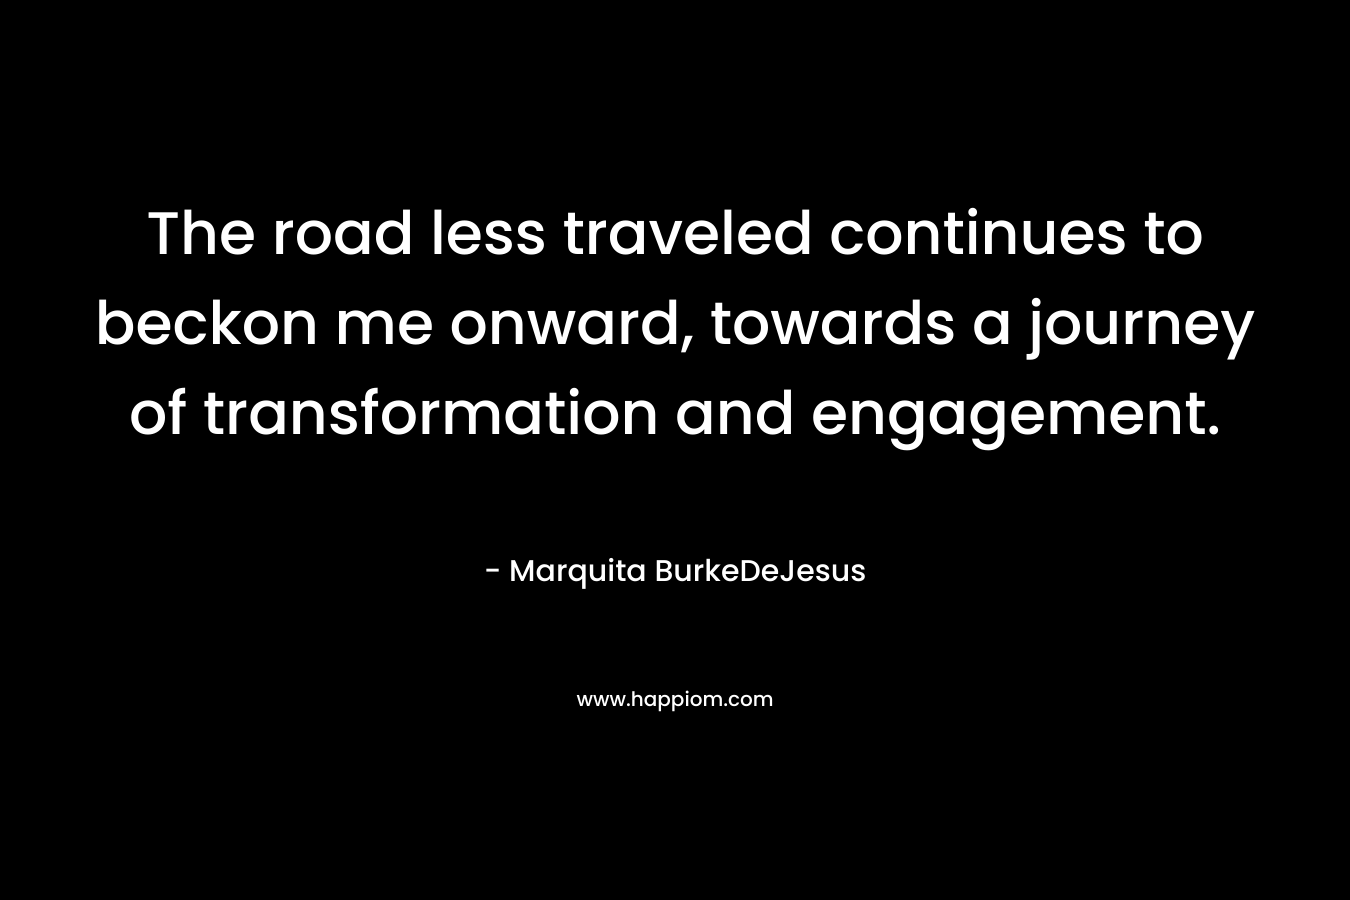 The road less traveled continues to beckon me onward, towards a journey of transformation and engagement.